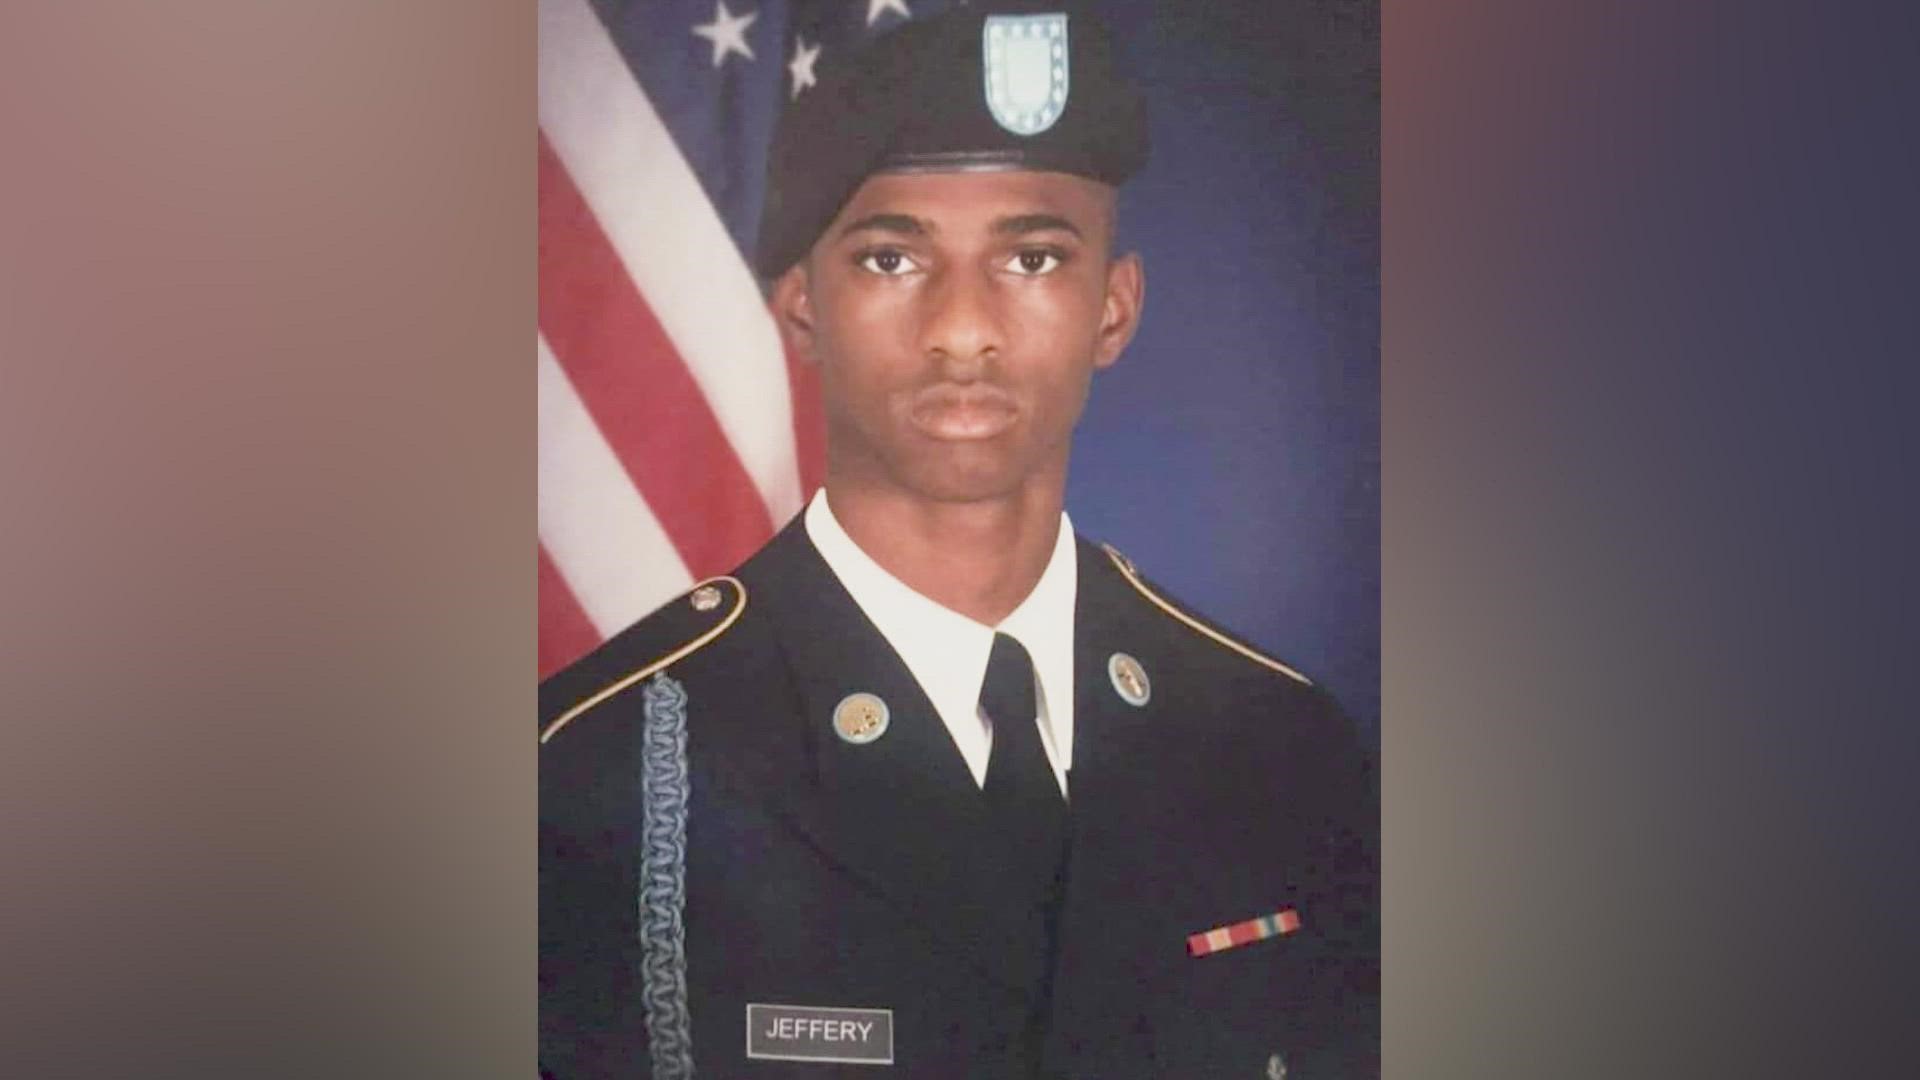 20-Year-Old National Guardsman Killed in Road Rage Shooting in Dallas